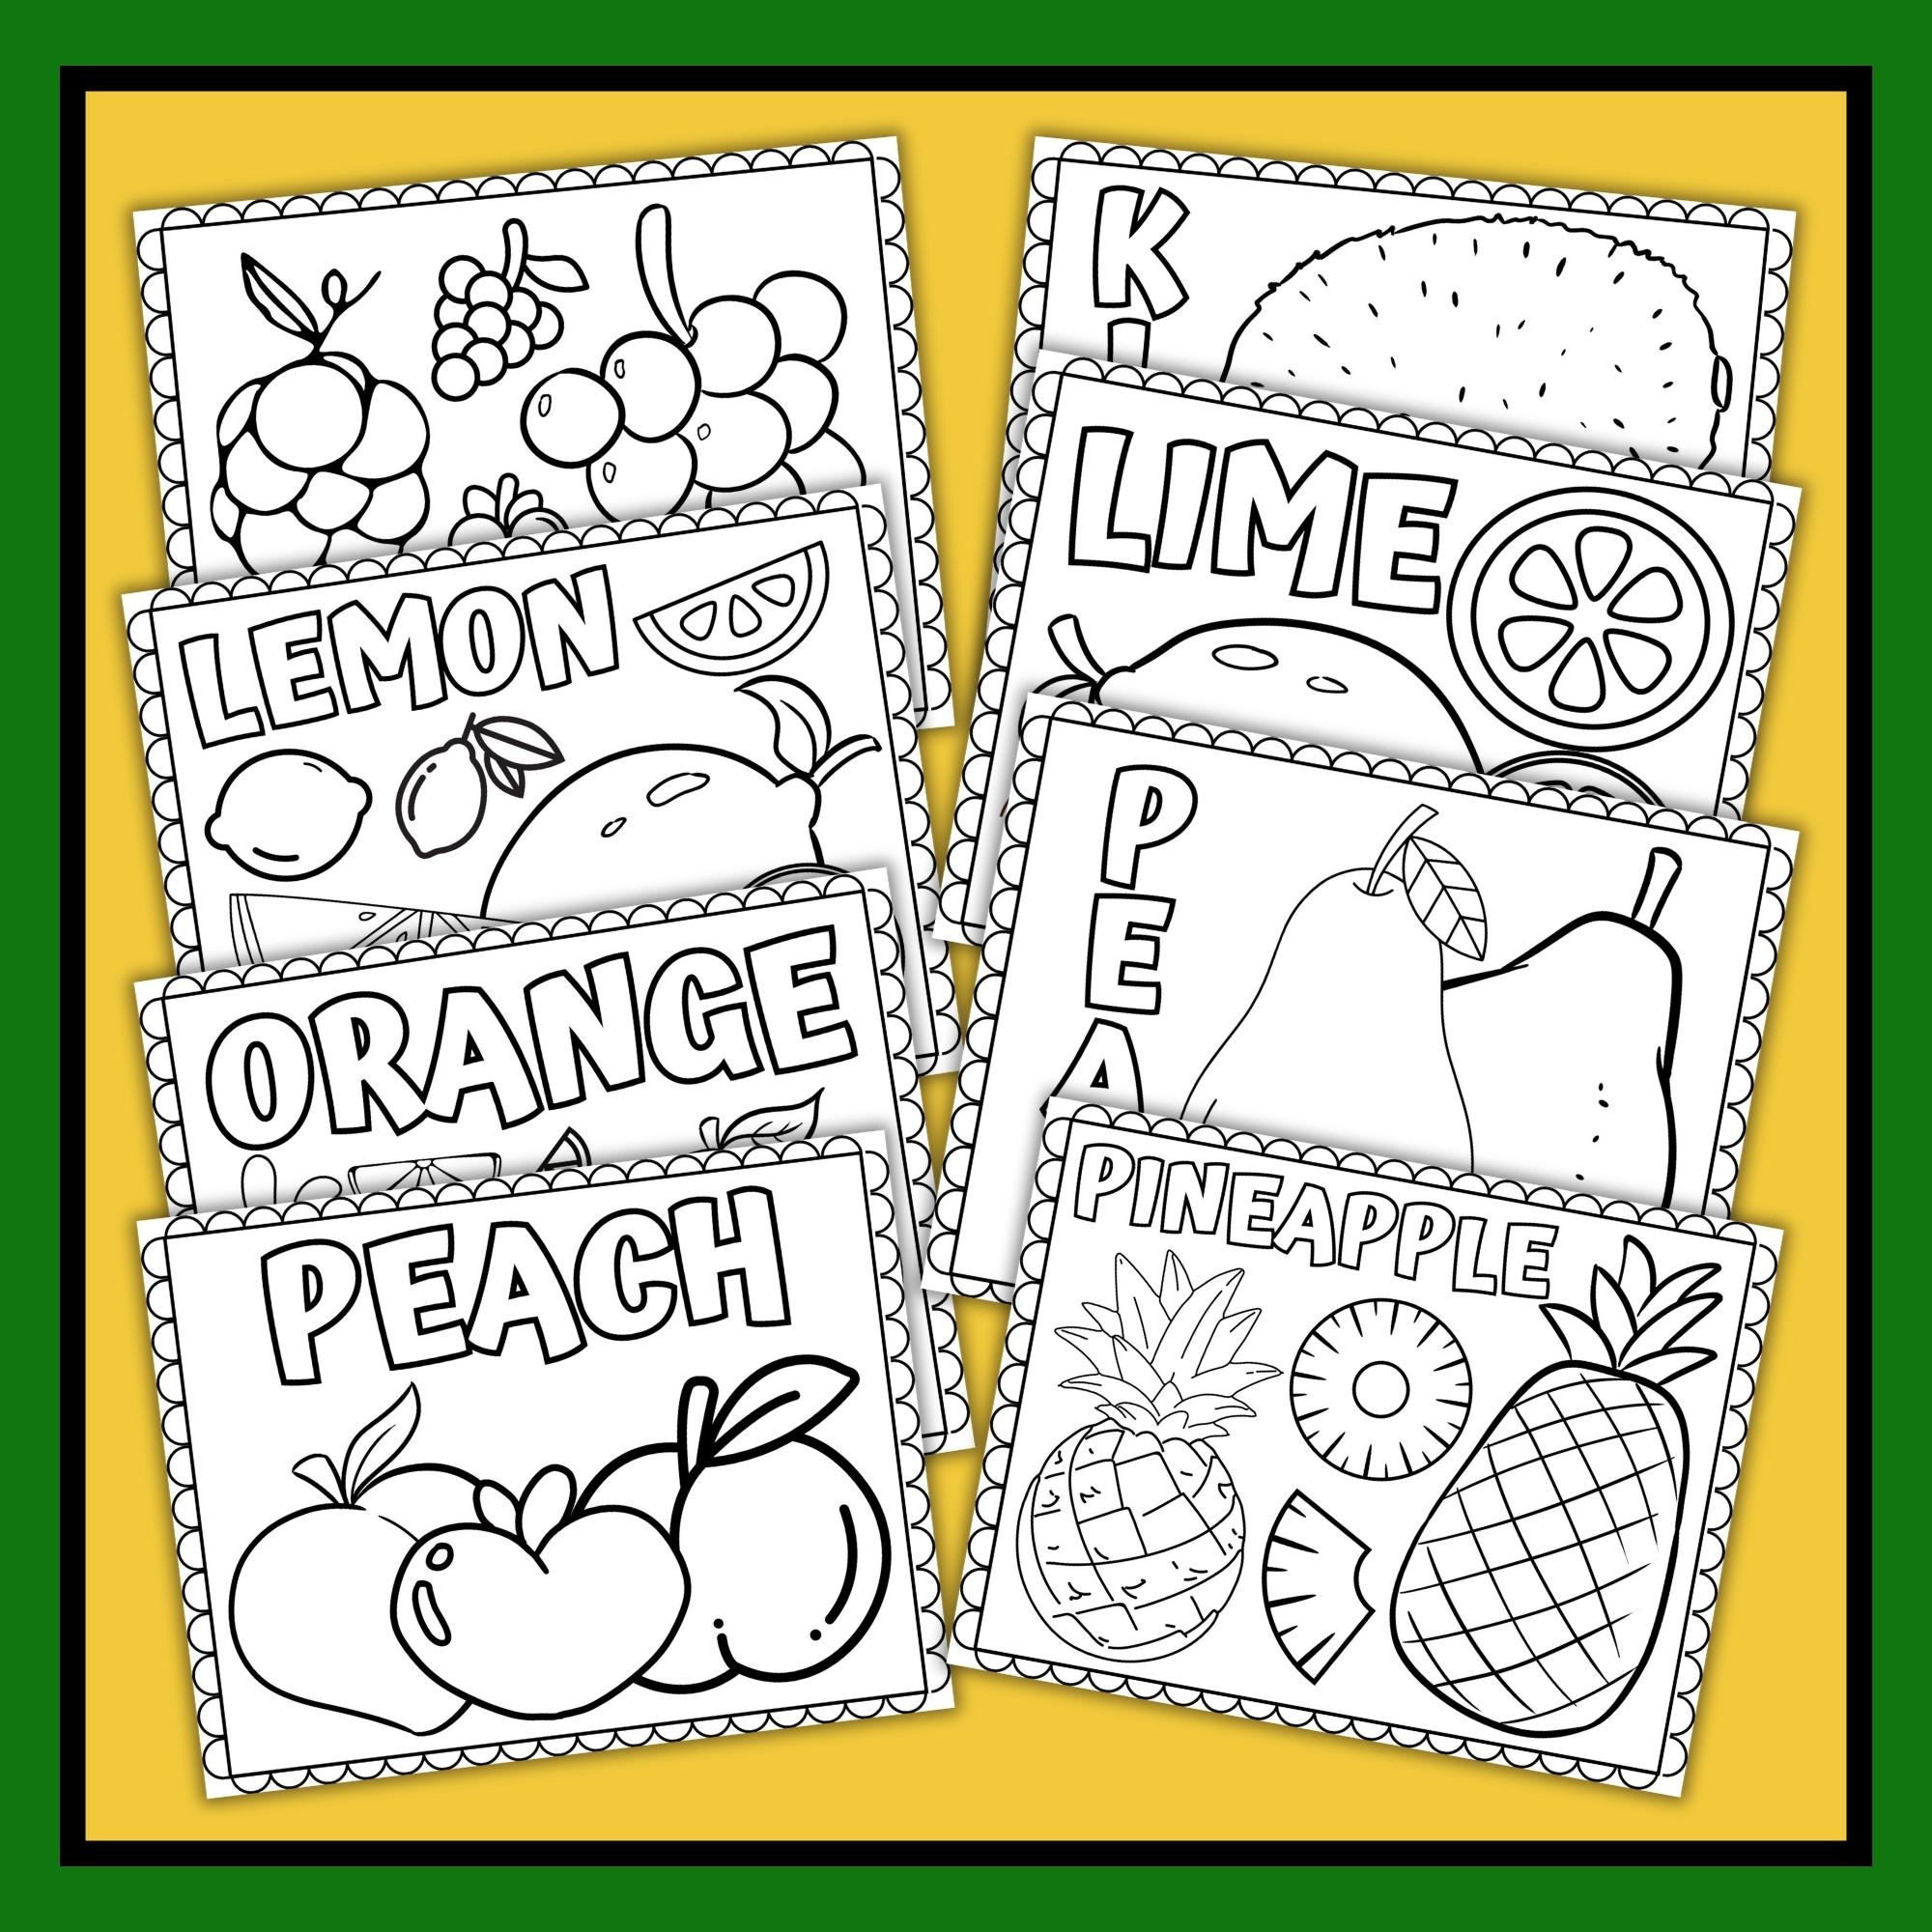 Fruits vegetables coloring pages